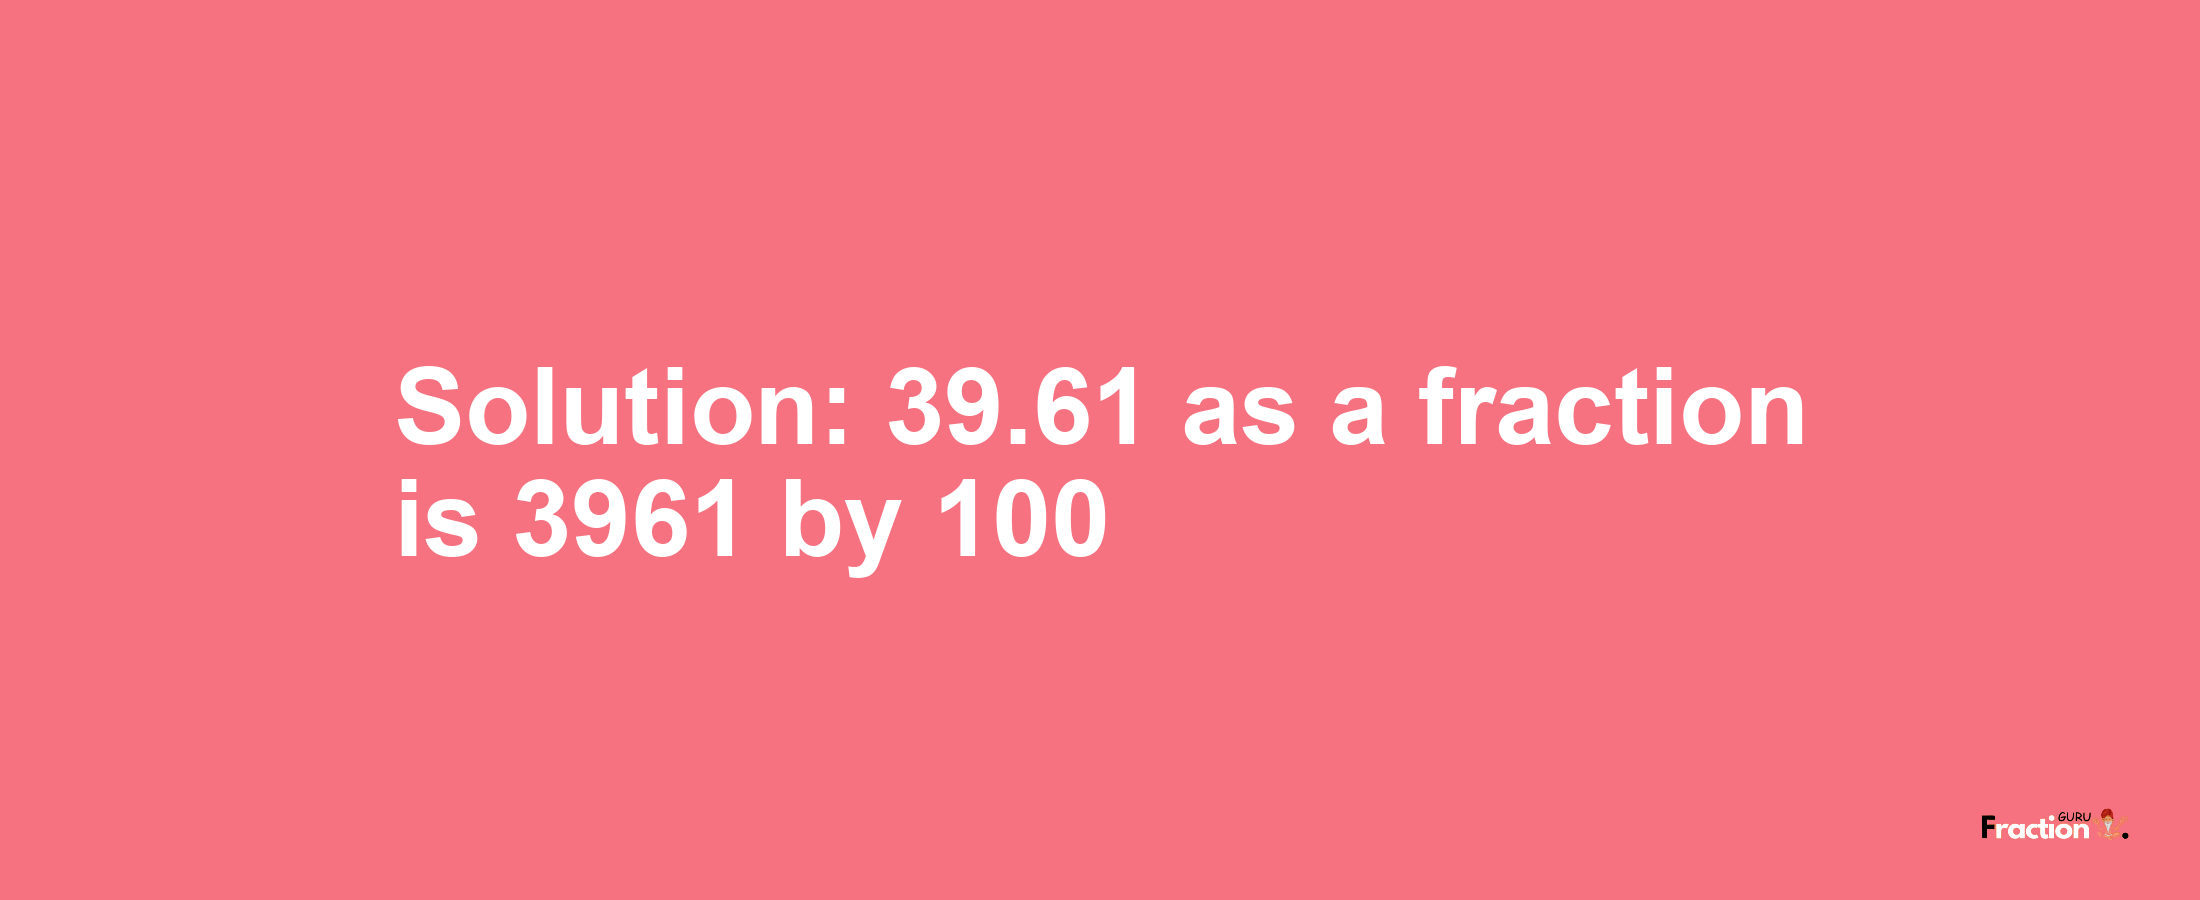 Solution:39.61 as a fraction is 3961/100